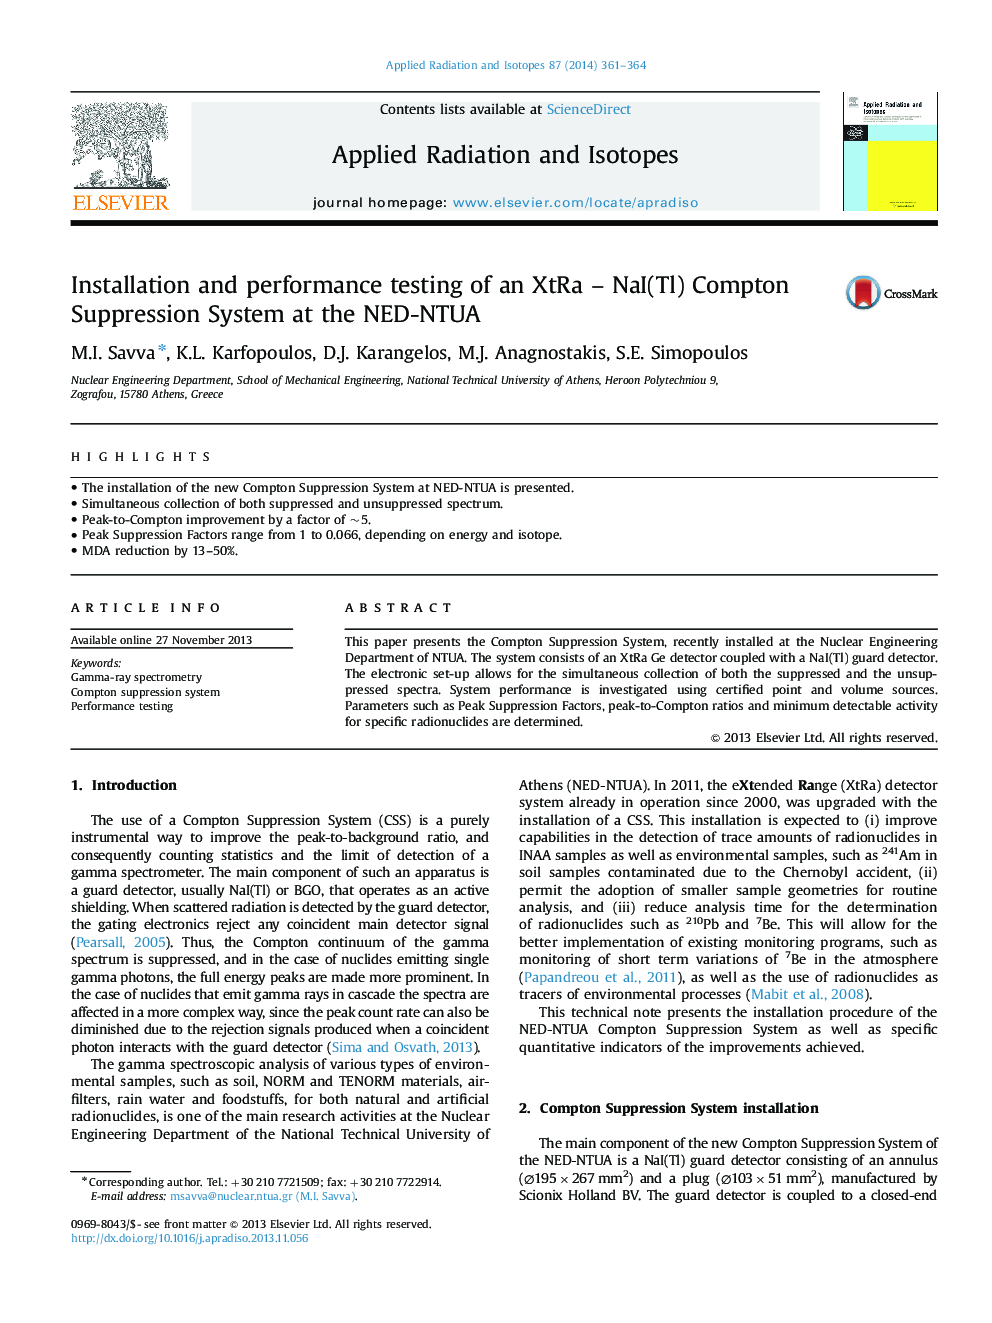 Installation and performance testing of an XtRa – NaI(Tl) Compton Suppression System at the NED-NTUA